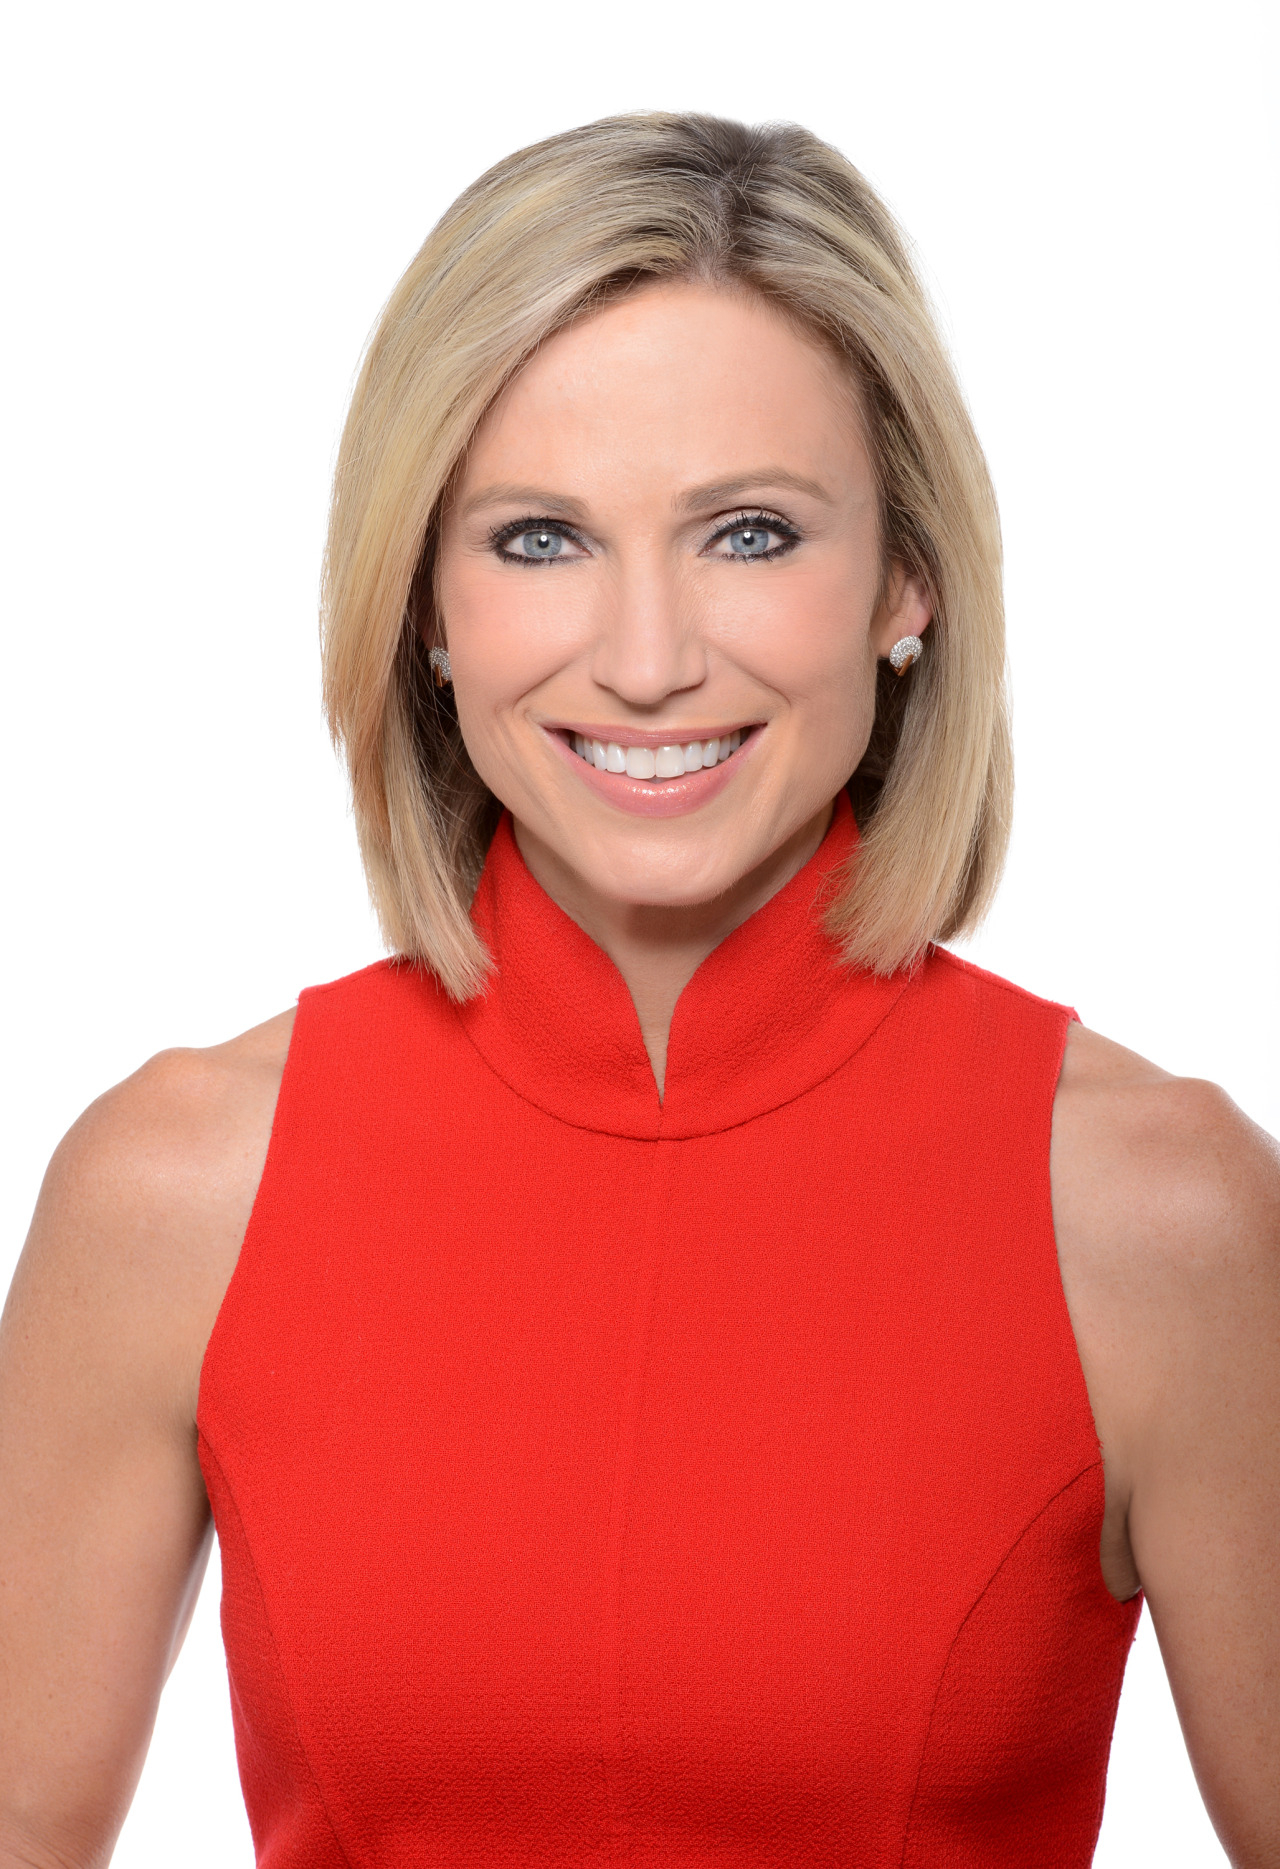 "Good Morning America's" Amy Robach to Join "20/20" as CoAnchor